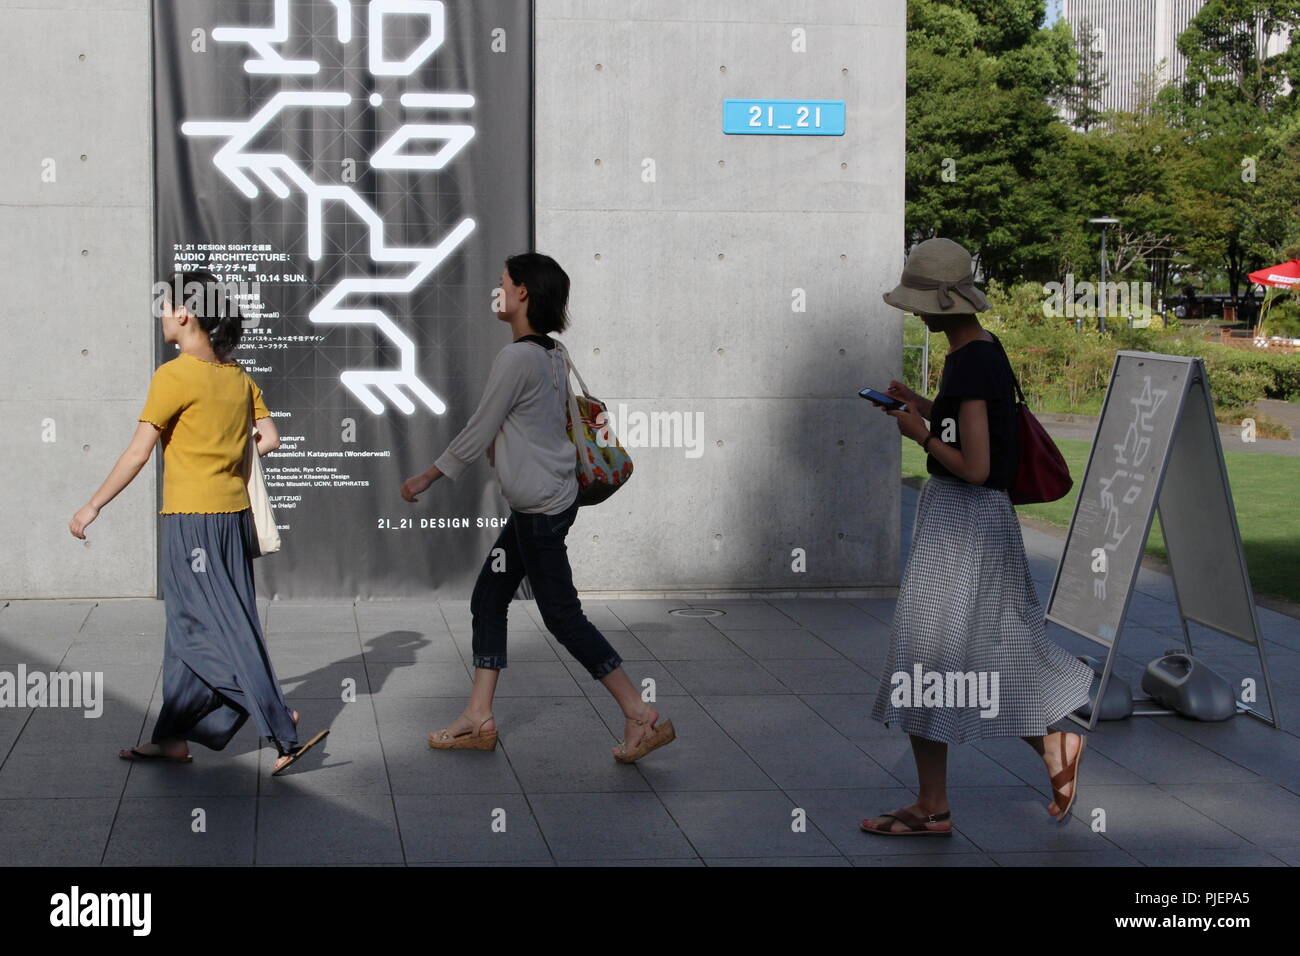 Visitors approaching an entrance to Tokyo Midtown's Tadao Ando-designed art museum 21 21 Design Sitein Roppongi. (August 2018) Stock Photo